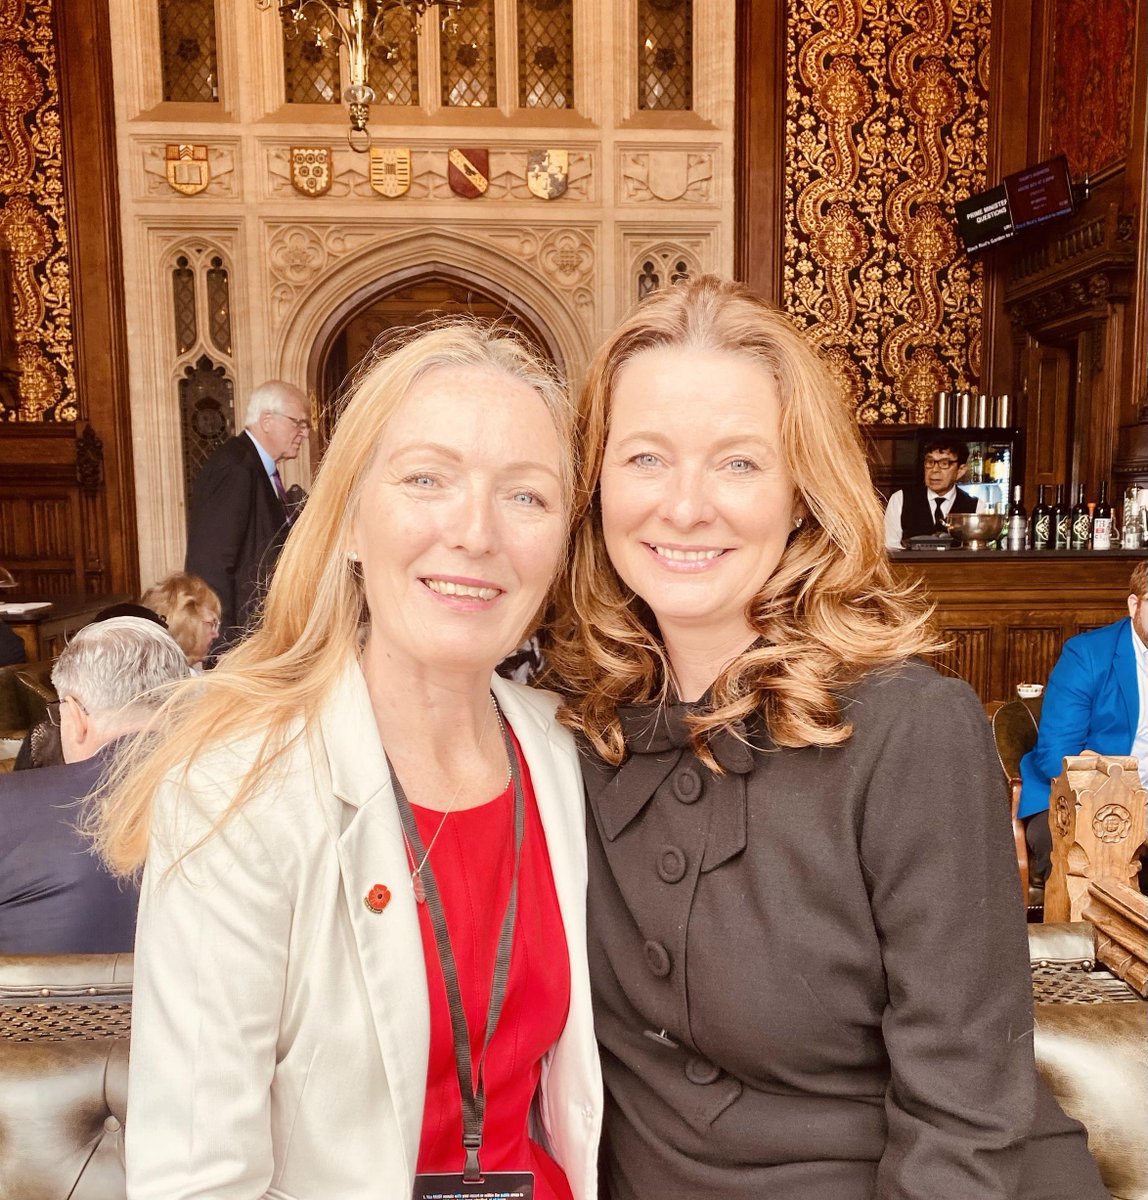 #Oliverscampaign Really positive meetings with @mariacaulfield @GillianKeegan @cj_dinenage @pspicer01 @TRMcGow The Oliver McGowan Mandatory Training on Learning Disability & Autism is in safe hands These ministers played a significant role in passing Olivers training into law